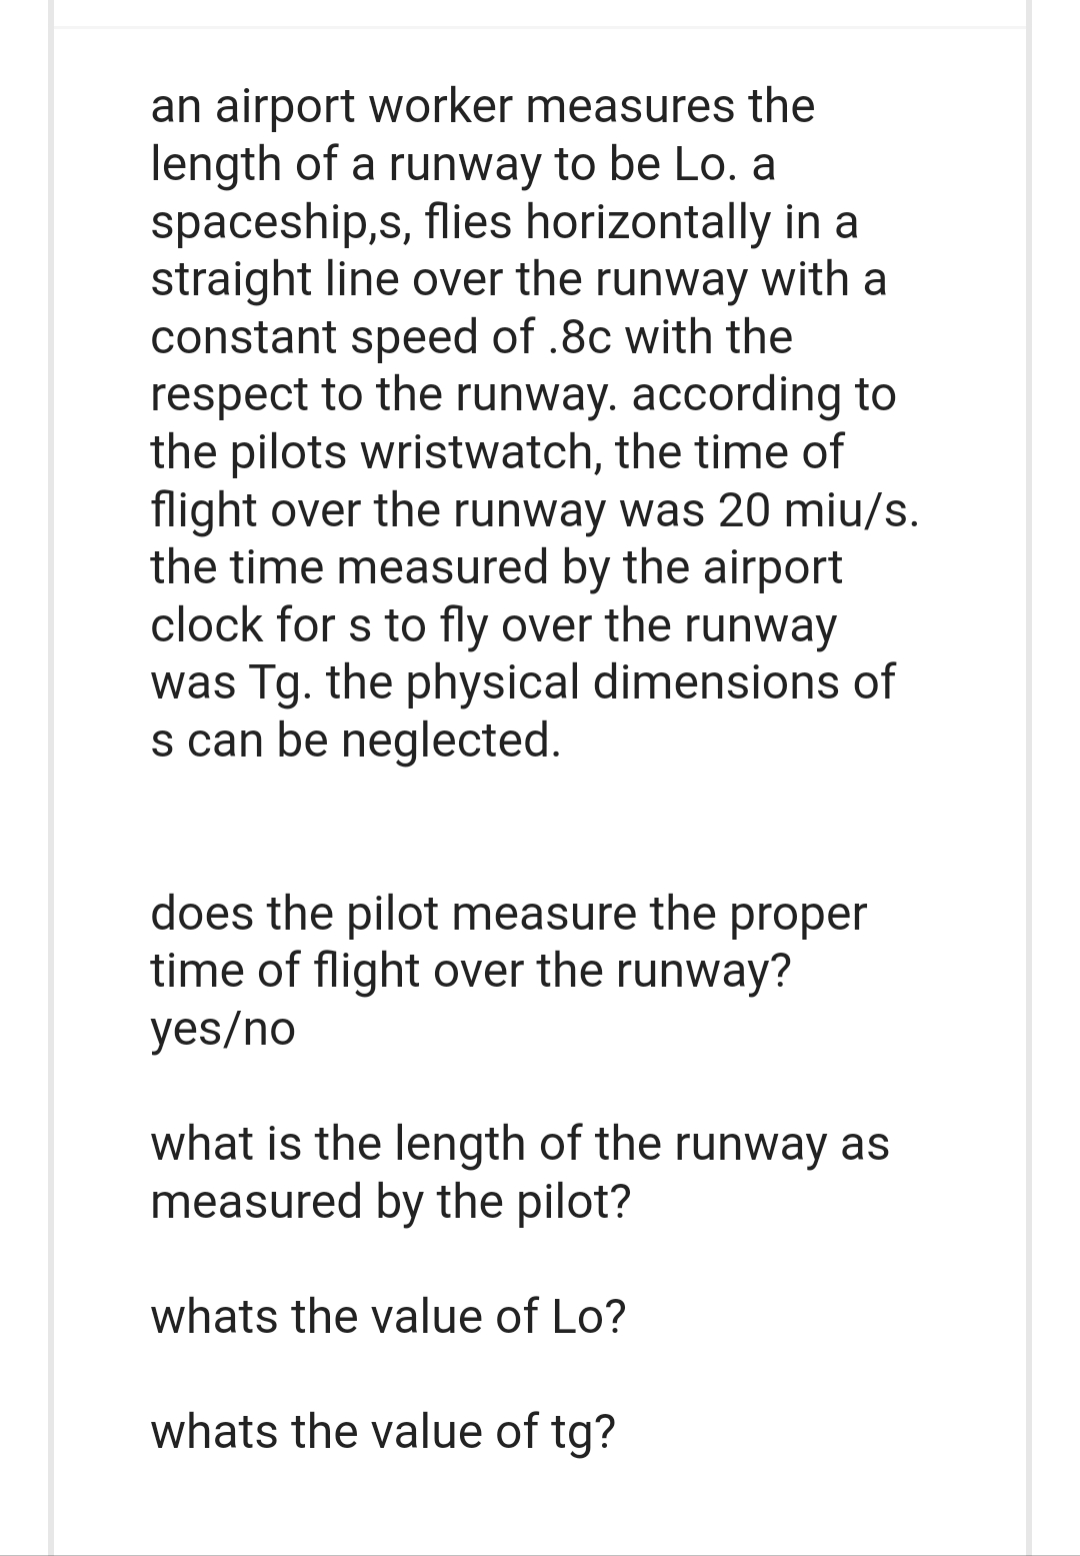 an airport worker measures the
length of a runway to be Lo. a
spaceship,s, flies horizontally in a
straight line over the runway with a
constant speed of .8c with the
respect to the runway. according to
the pilots wristwatch, the time of
flight over the runway was 20 miu/s.
the time measured by the airport
clock for s to fly over the runway
was Tg. the physical dimensions of
s can be neglected.
does the pilot measure the proper
time of flight over the runway?
yes/no
what is the length of the runway as
measured by the pilot?
whats the value of Lo?
whats the value of tg?